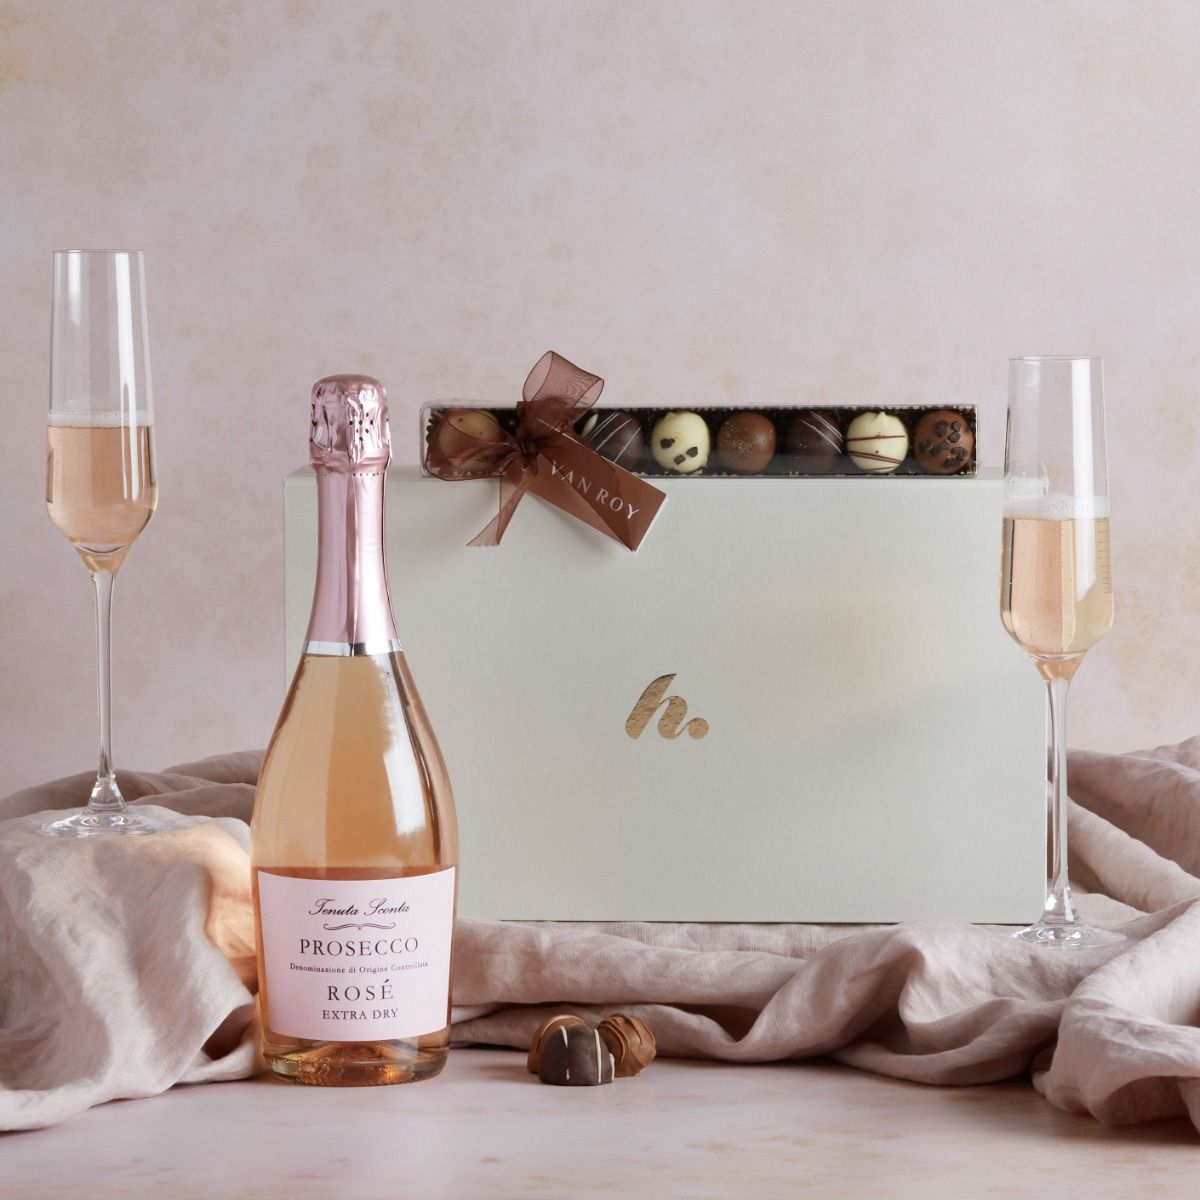 Prosecco Rosé and Truffles Hamper with contents on display and Prosecco in a flute